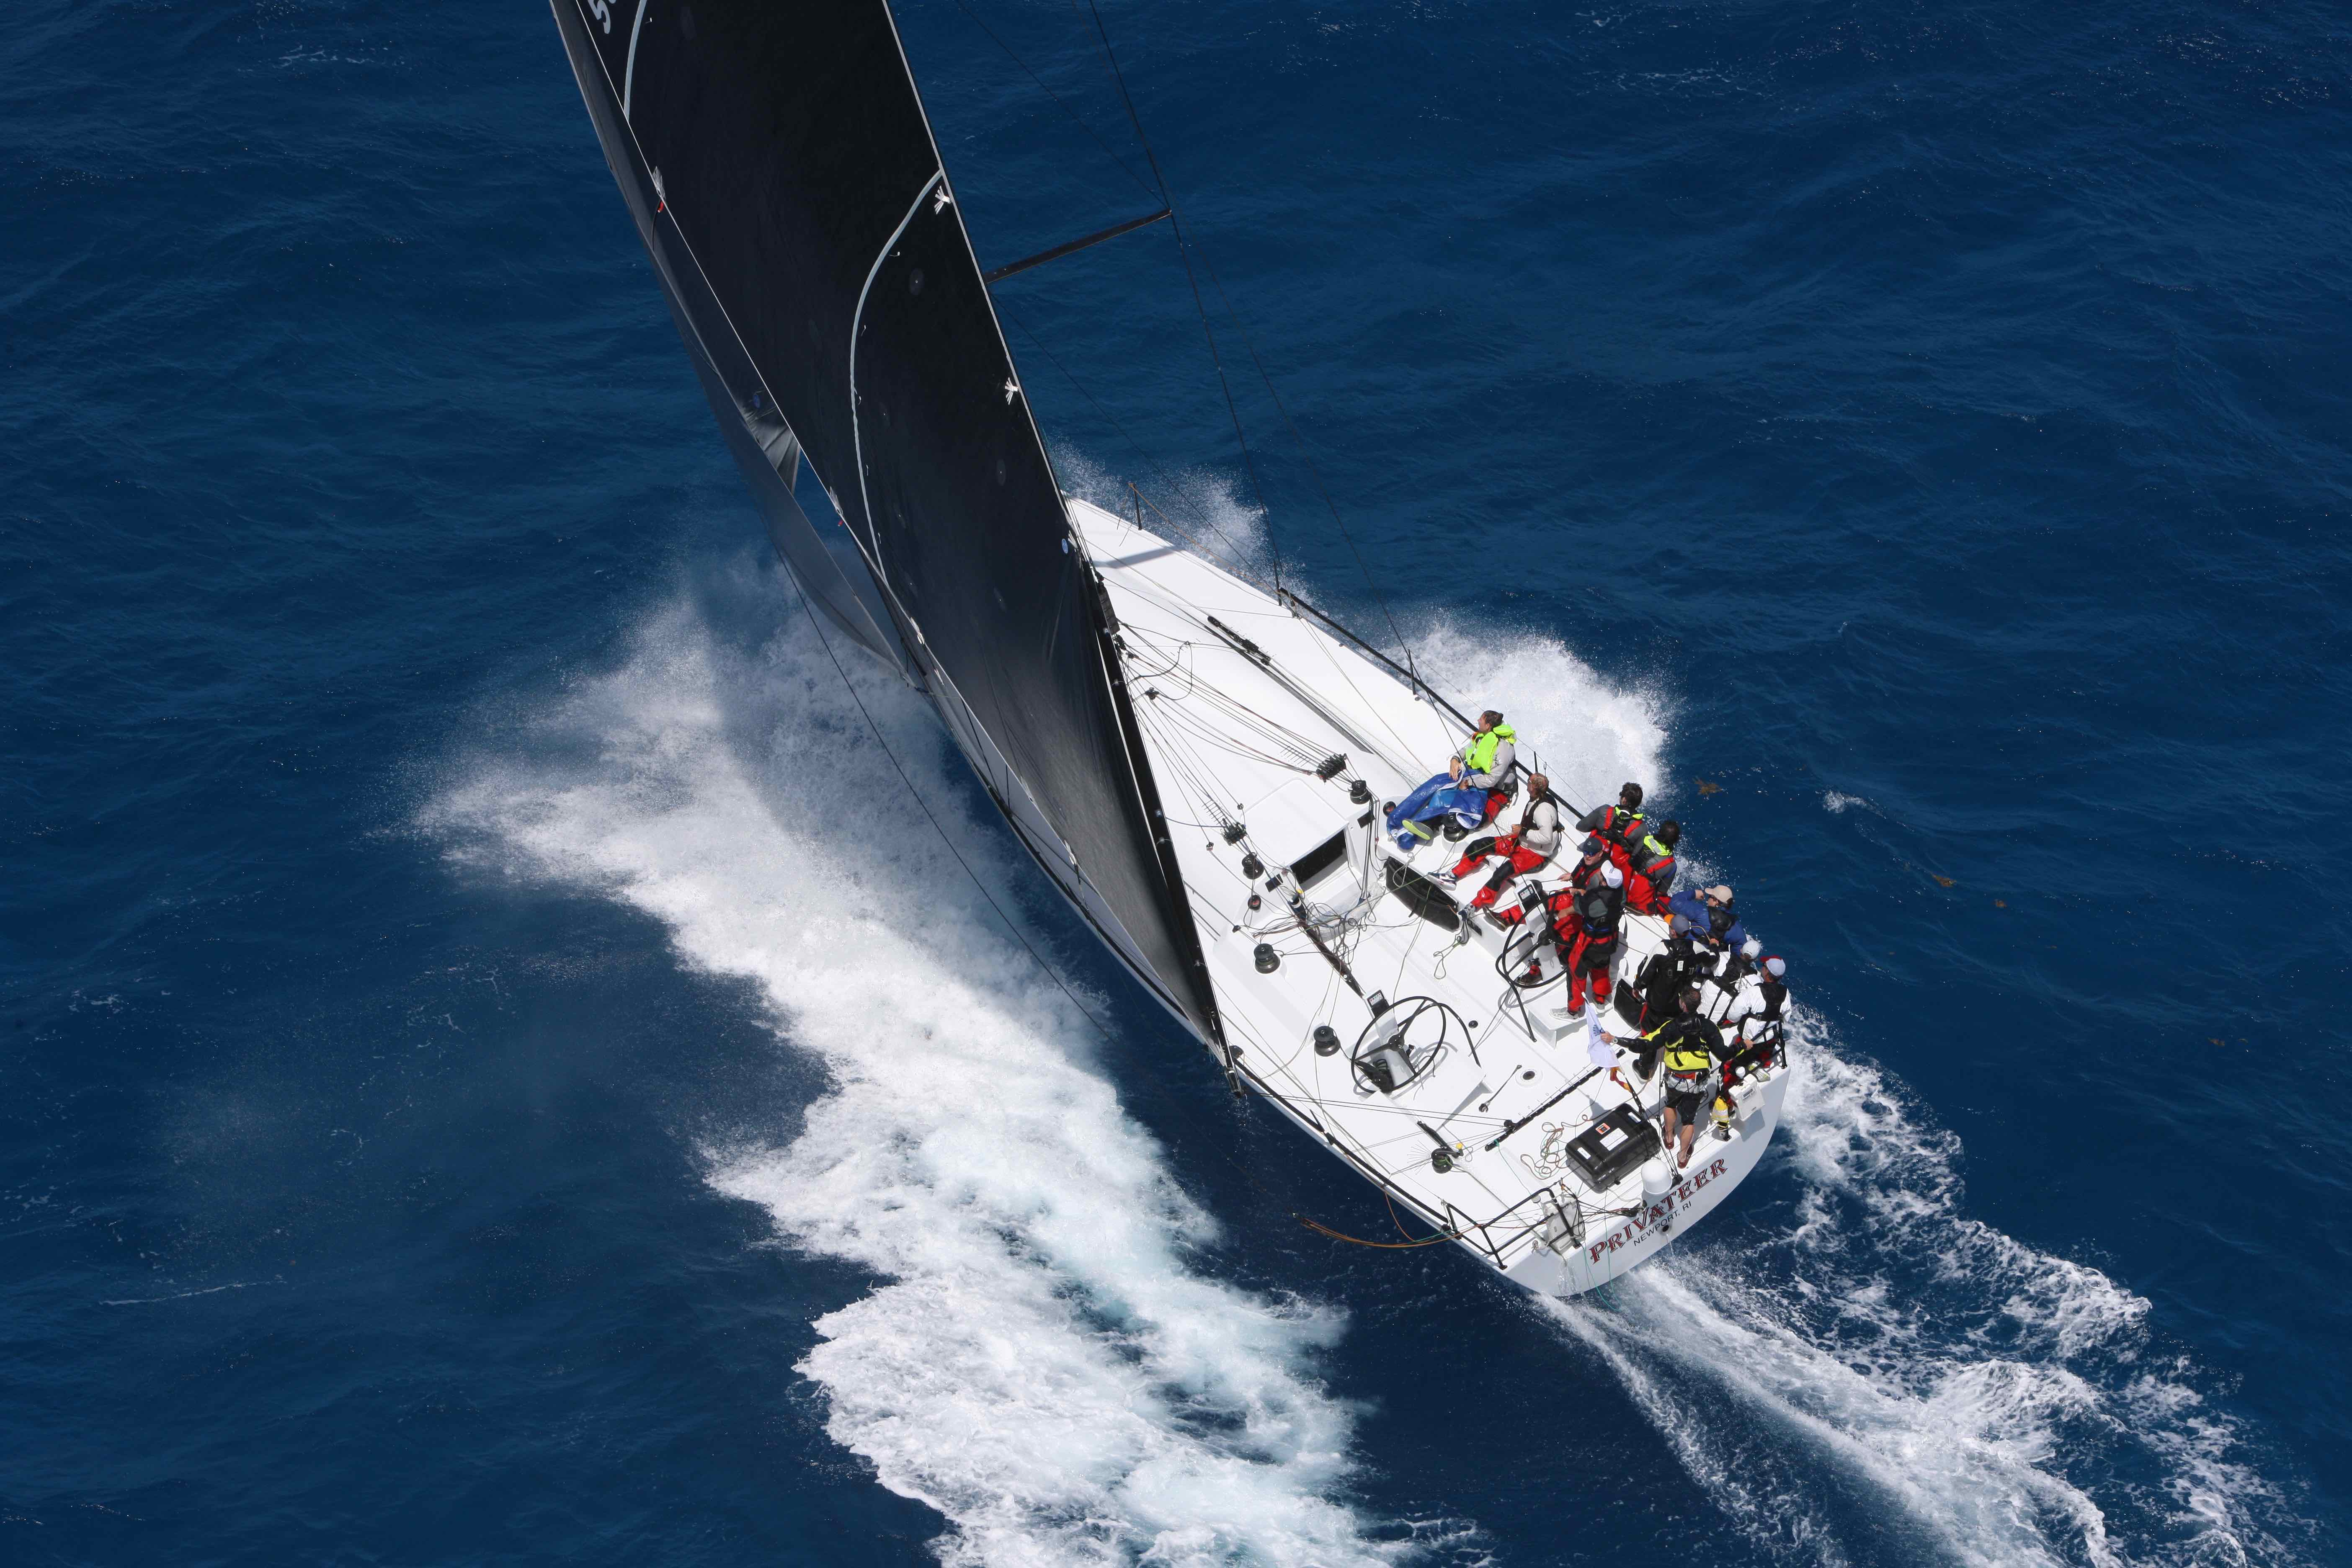 Several previous winners of the RORC Caribbean 600 Trophy will be on the startline and include Ron O'Hanley's American Cookson 50 Privateer © Tim Wright/Photoaction.com